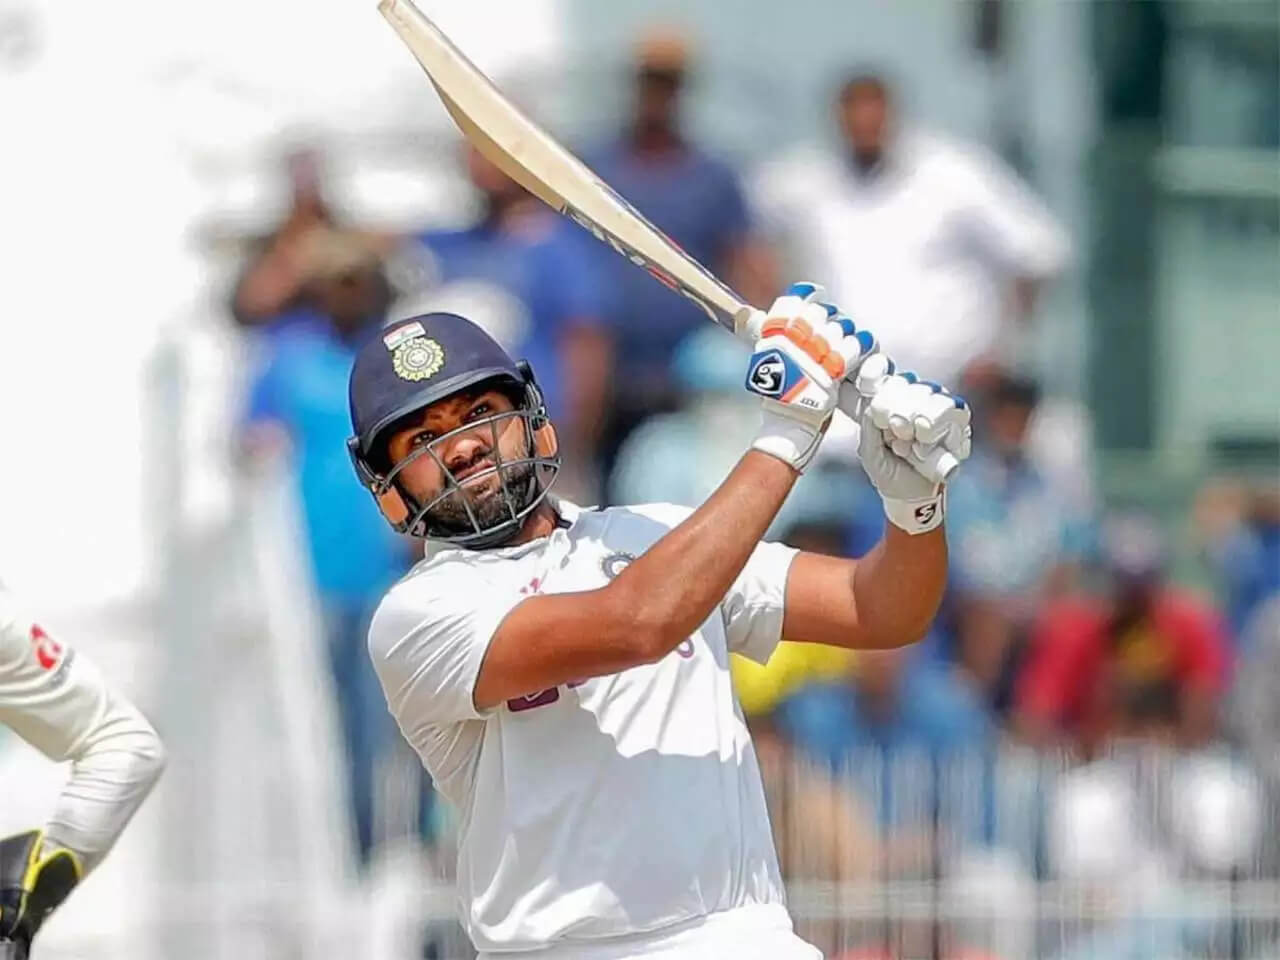 Rohit Sharma's batting has improved to the point that Sanjay Manjrekar advises to "keep his IPL form aside" going into the WTC final.